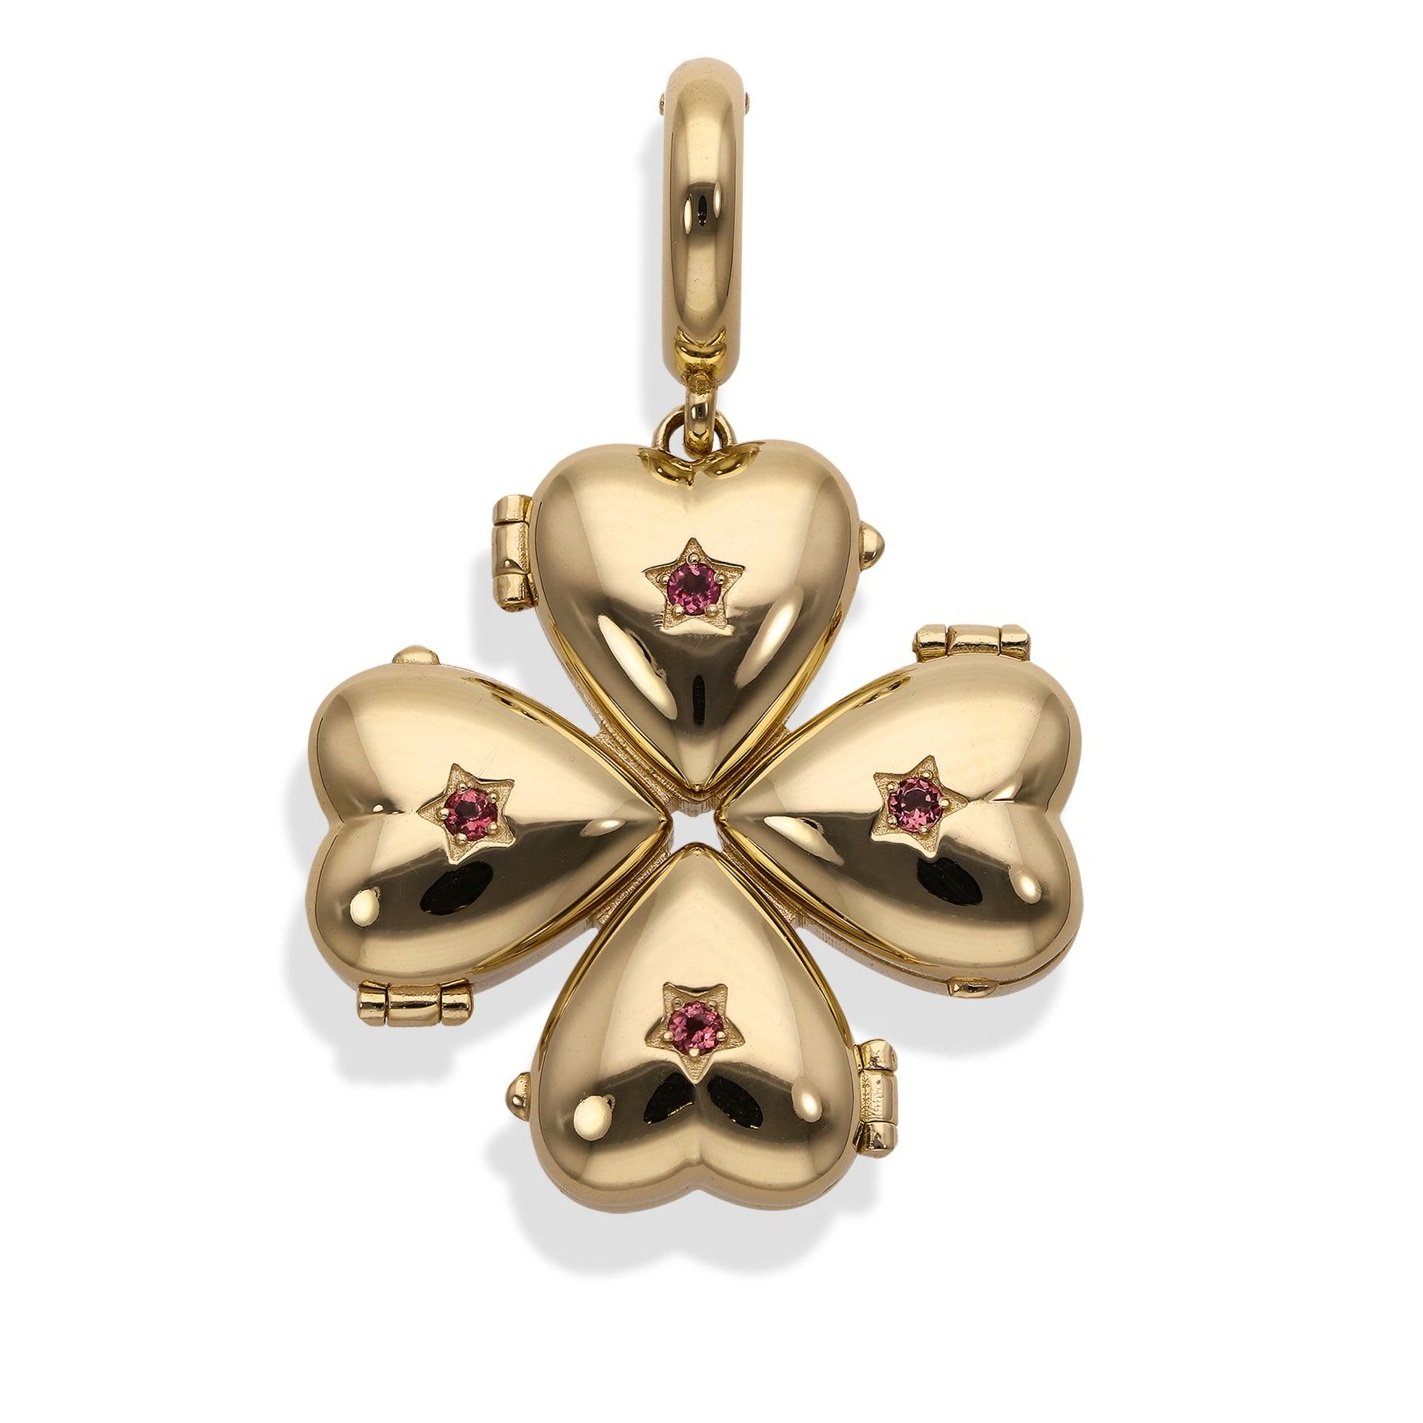 Jewelry that makes Lauren feel strong, her clover pendant because it holds unique secrets for each person that owns it